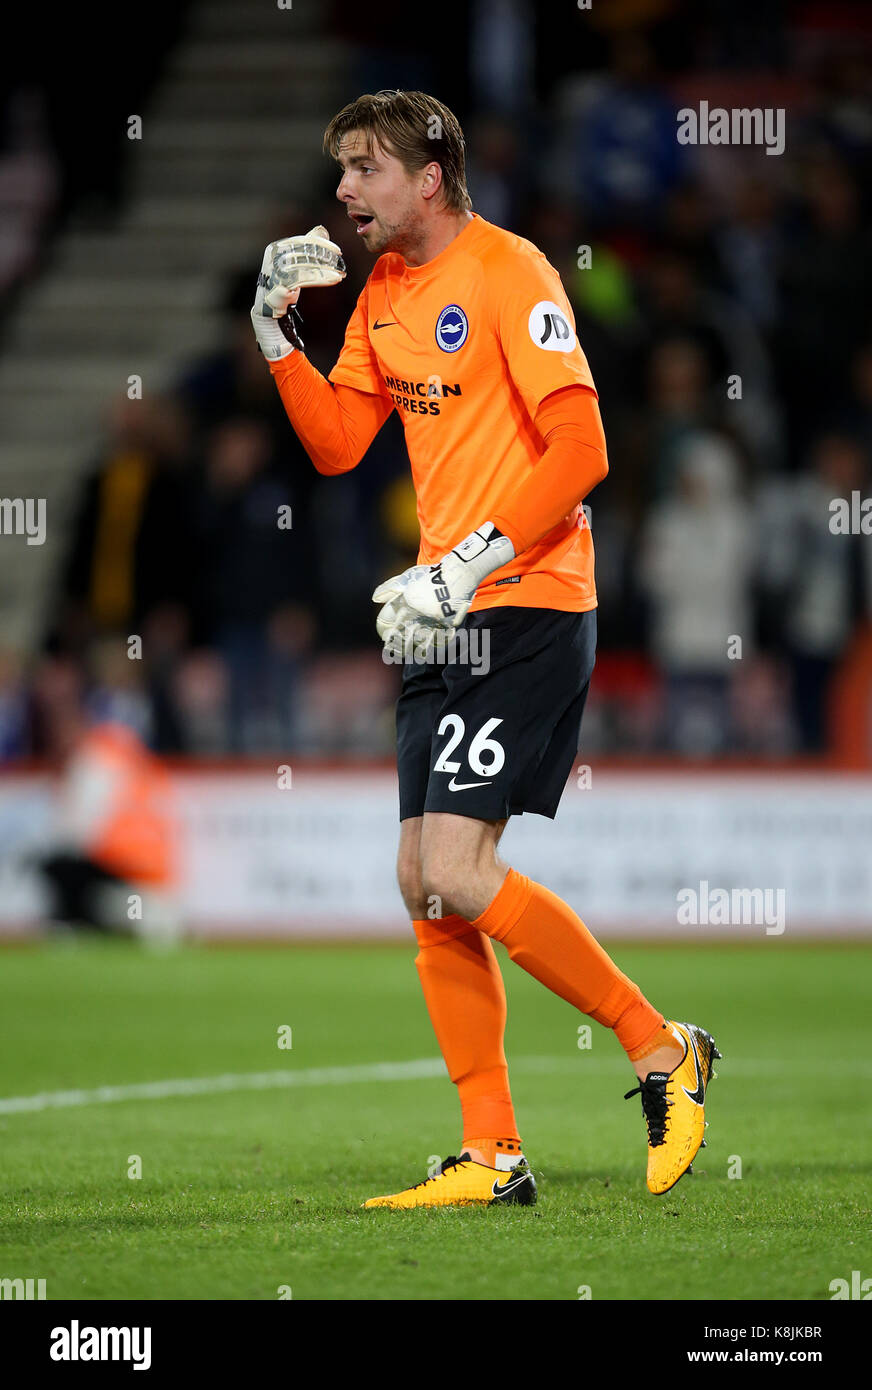 Brighton and Hove Albion Tim Krul during the Carabao Cup, third round match at the Vitality Stadium, Bournemouth. PRESS ASSOCIATION Photo. Picture date: Tuesday September 19, 2017. See PA story SOCCER Bournemouth. Photo credit should read: Steven Paston/PA Wire. RESTRICTIONS: No use with unauthorised audio, video, data, fixture lists, club/league logos or 'live' services. Online in-match use limited to 75 images, no video emulation. No use in betting, games or single club/league/player publications. Stock Photo